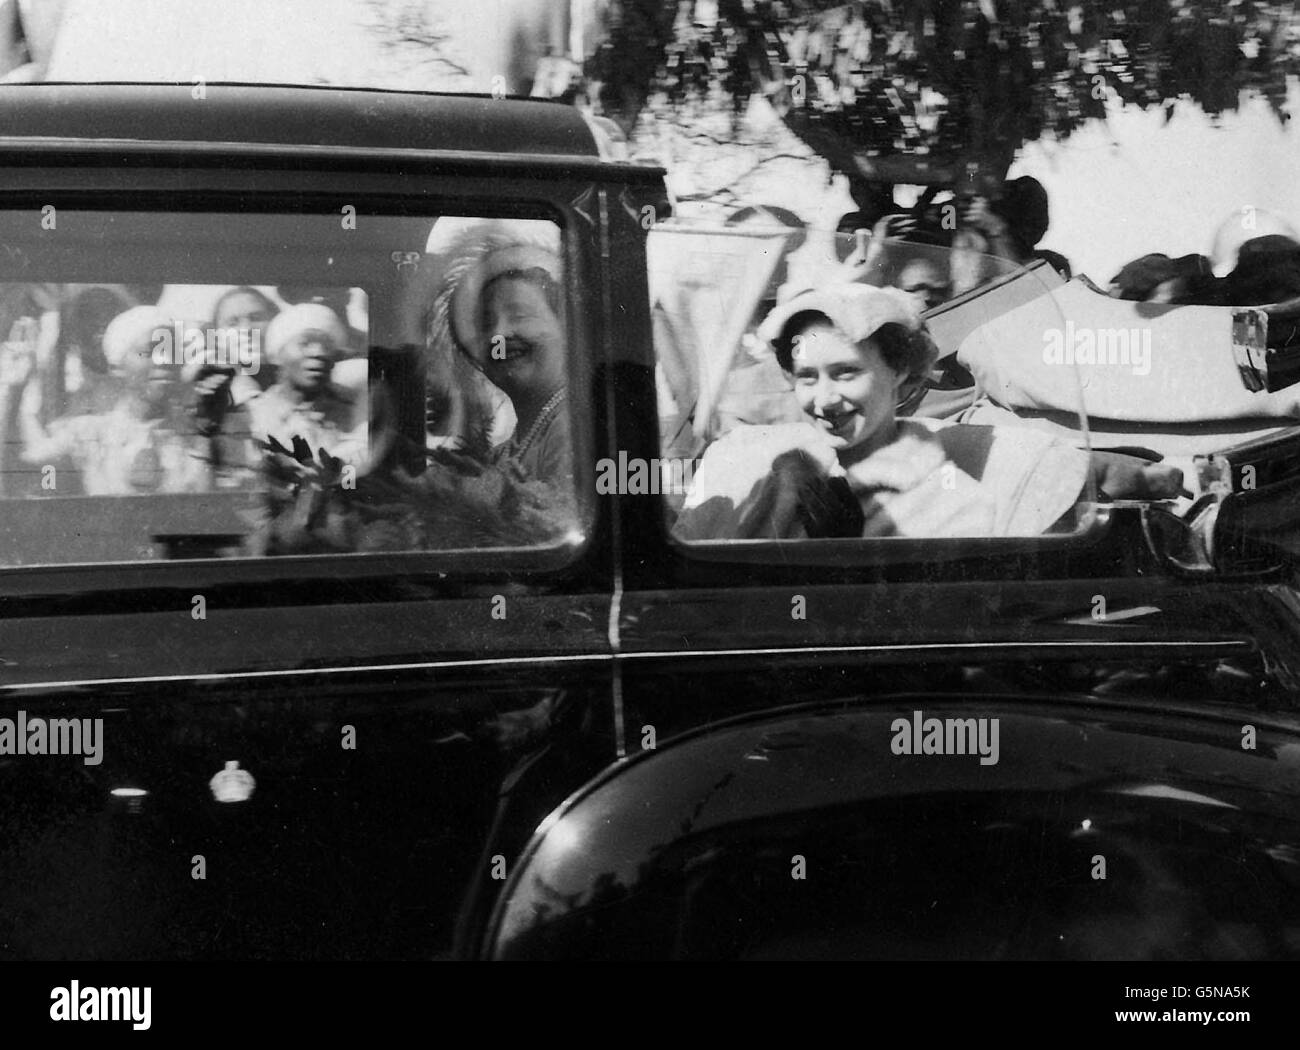 Queen Elizabeth The Queen Mother (L) with her daughter Princess Margaret watch, as they drive in the Royal car, at an dance from African women during their visit to Southern Rhodesia. Stock Photo